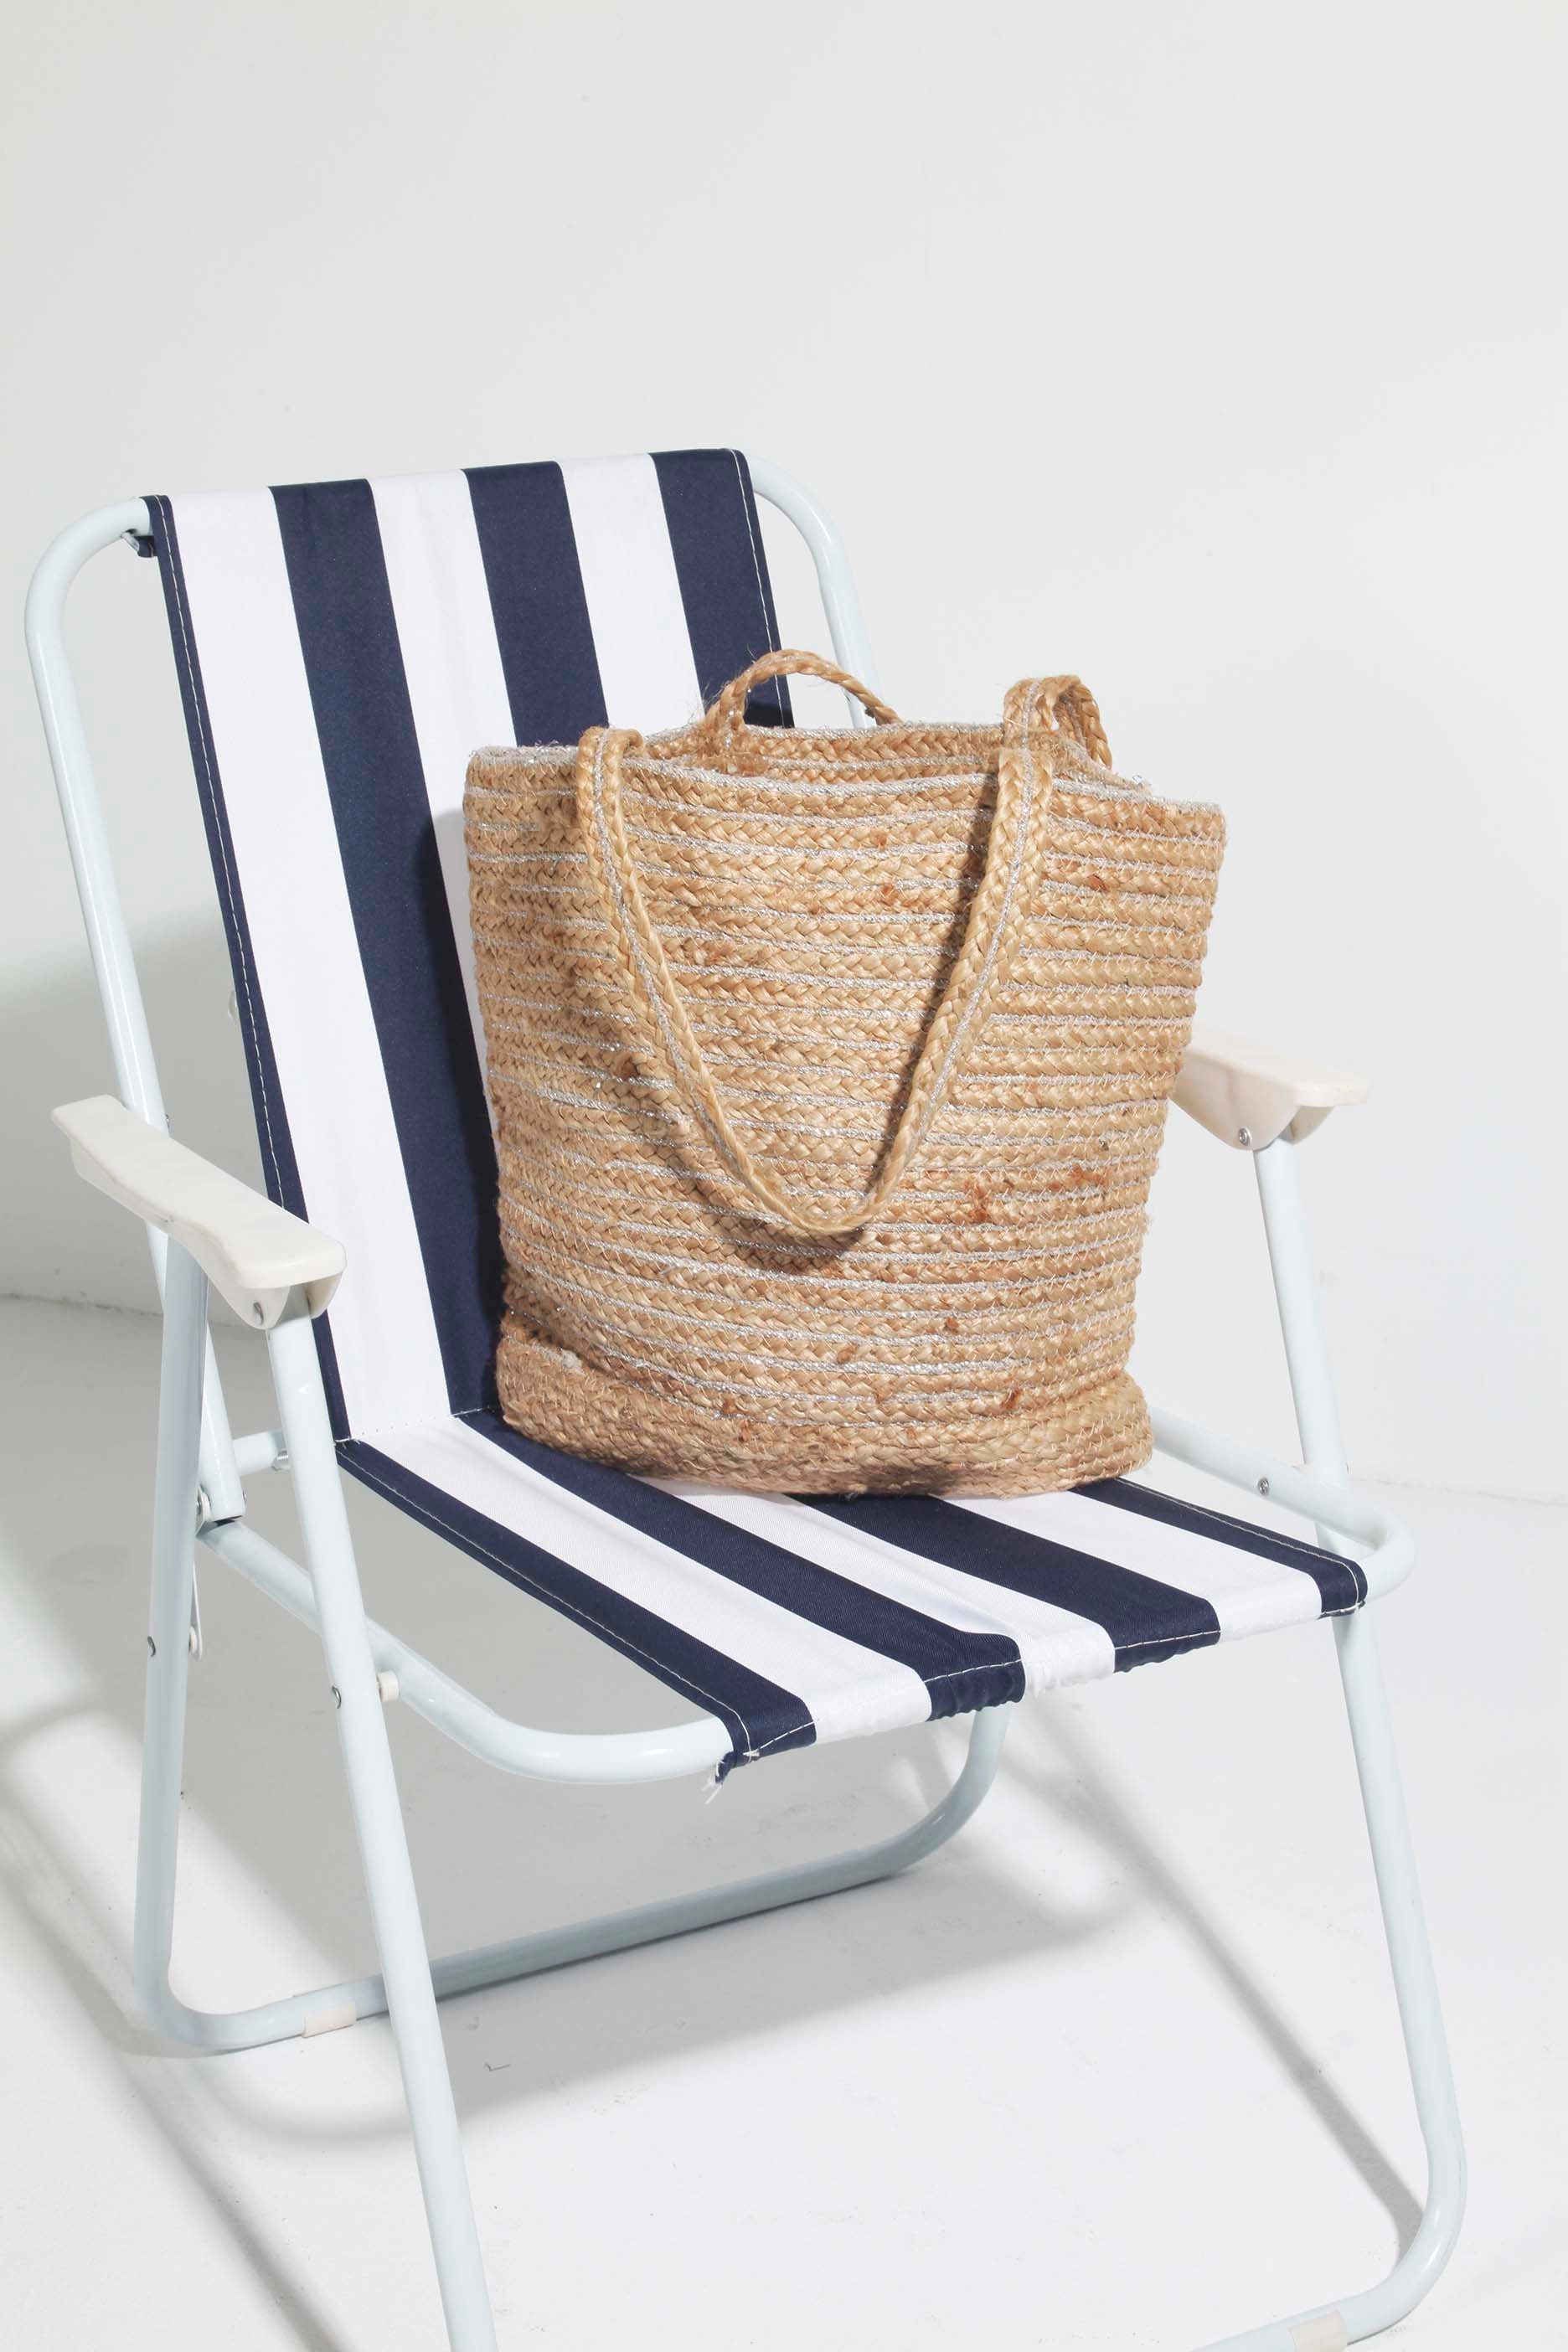 Woven Straw Bag with Metallic Threads